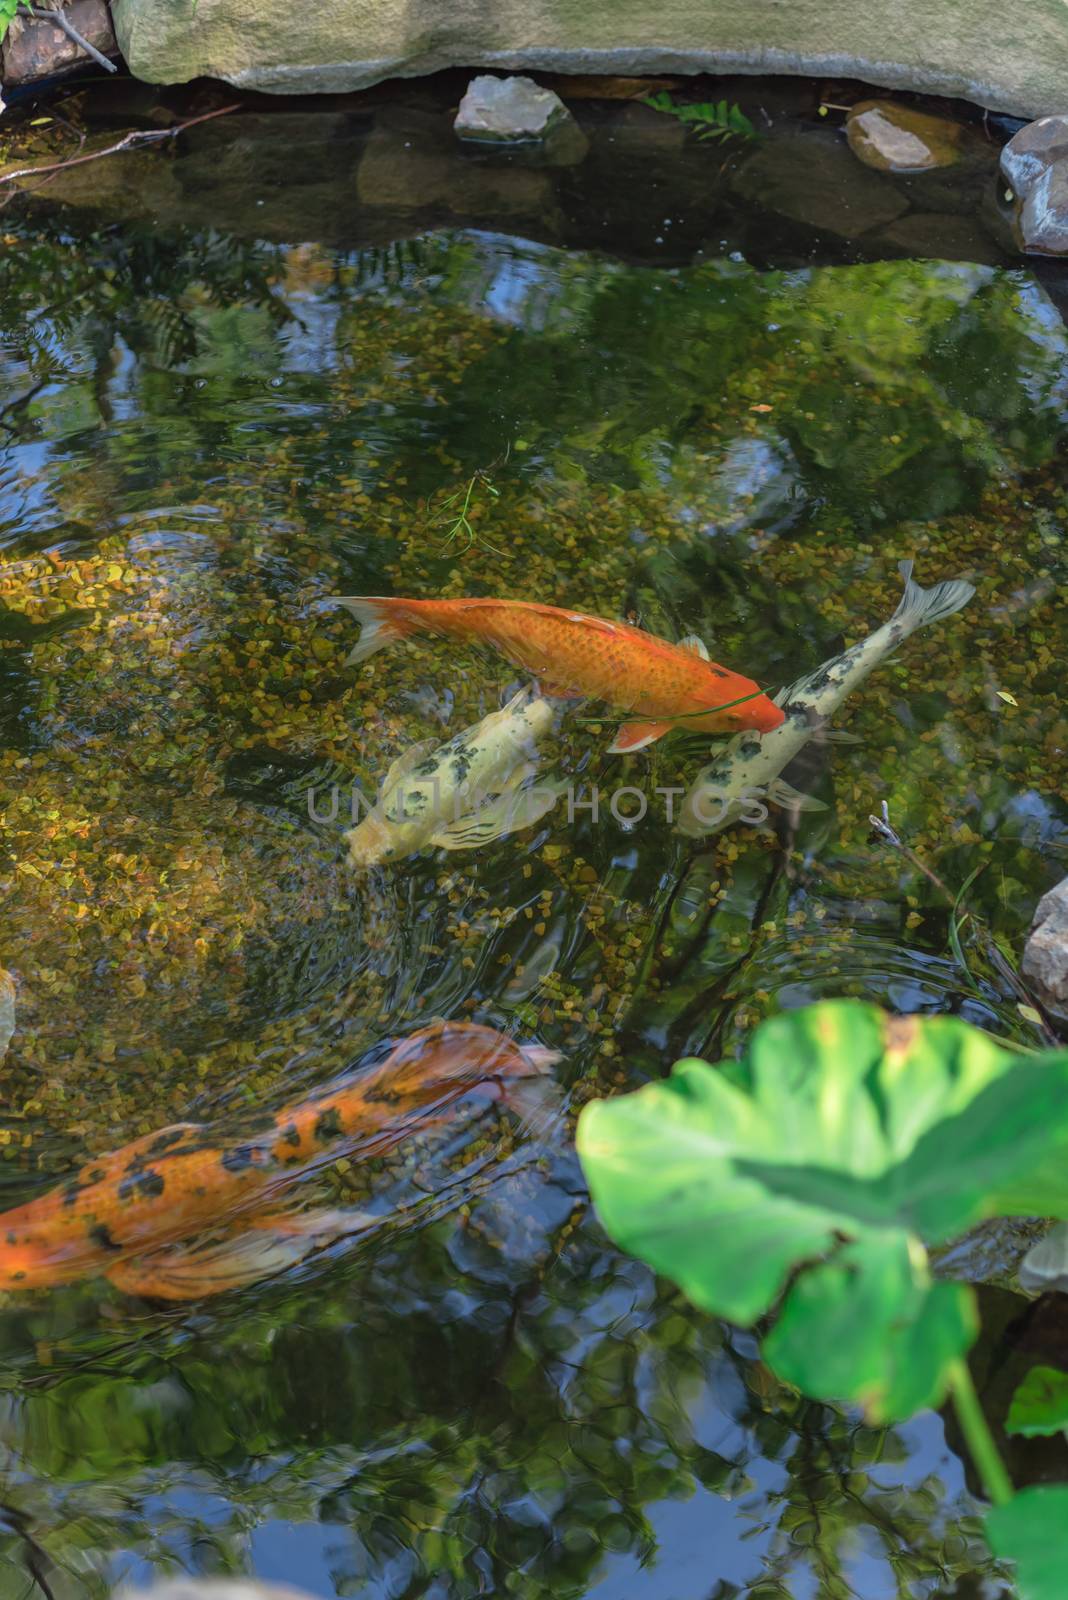 Green tropical plants with koi fishes swimming in shallow lean pond at botanical garden near Dallas, Texas, America